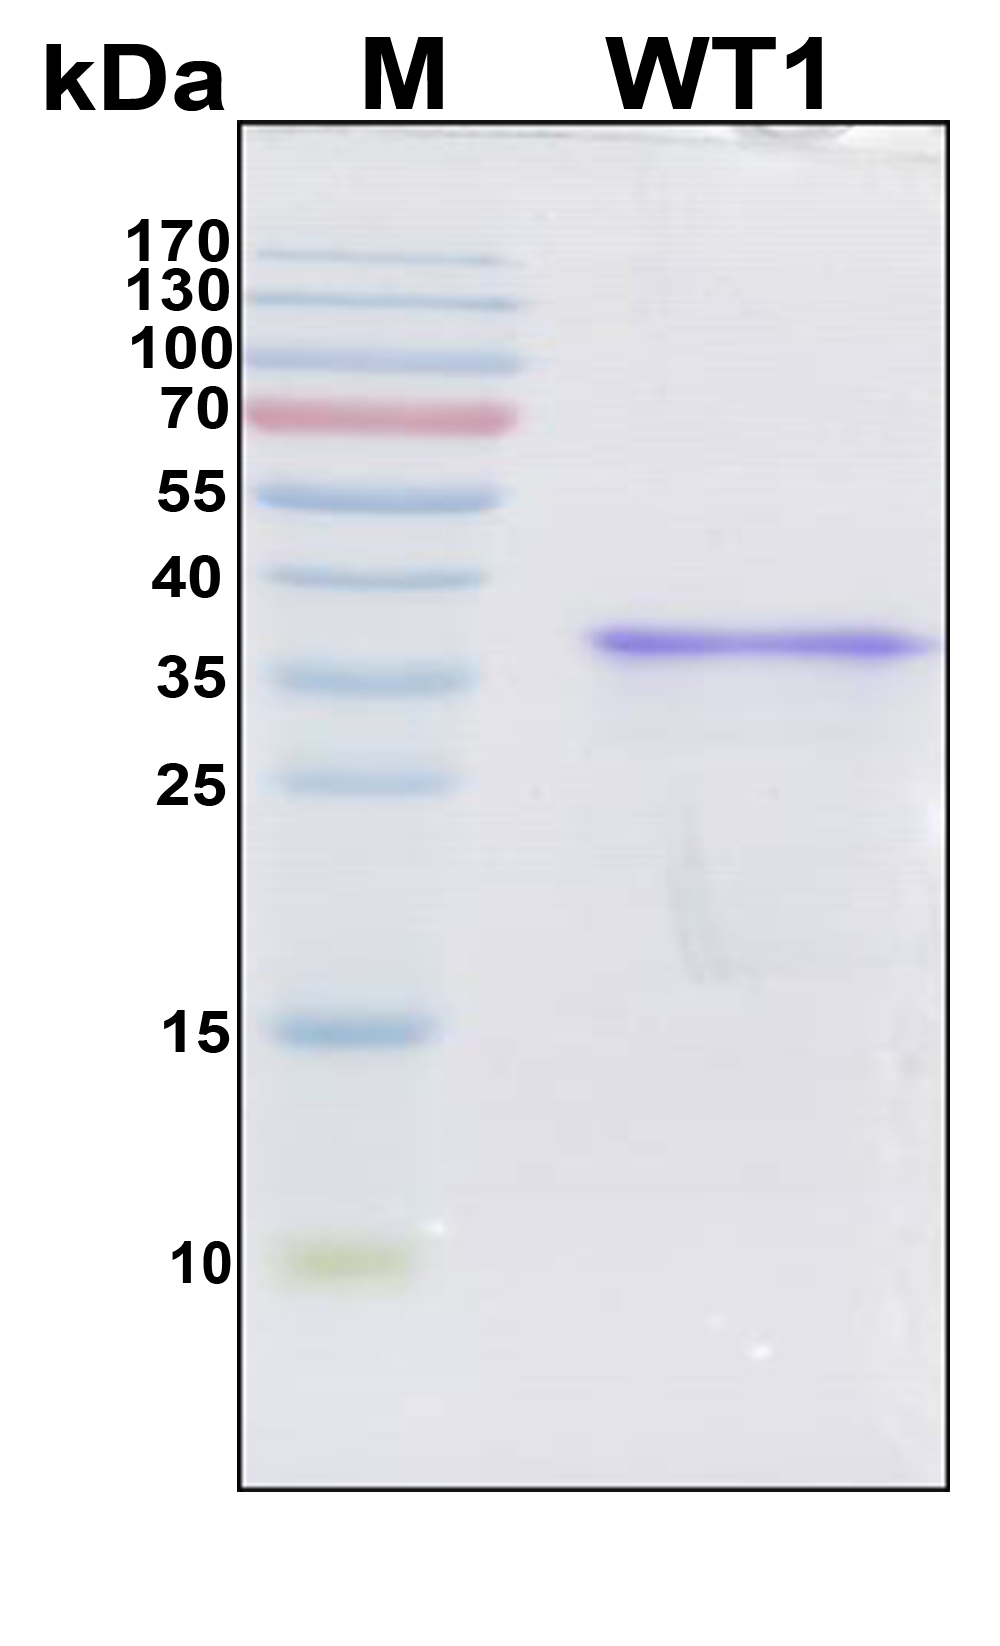 WT1 / Wilms Tumor 1 Protein - SDS-PAGE under reducing conditions and visualized by Coomassie blue staining